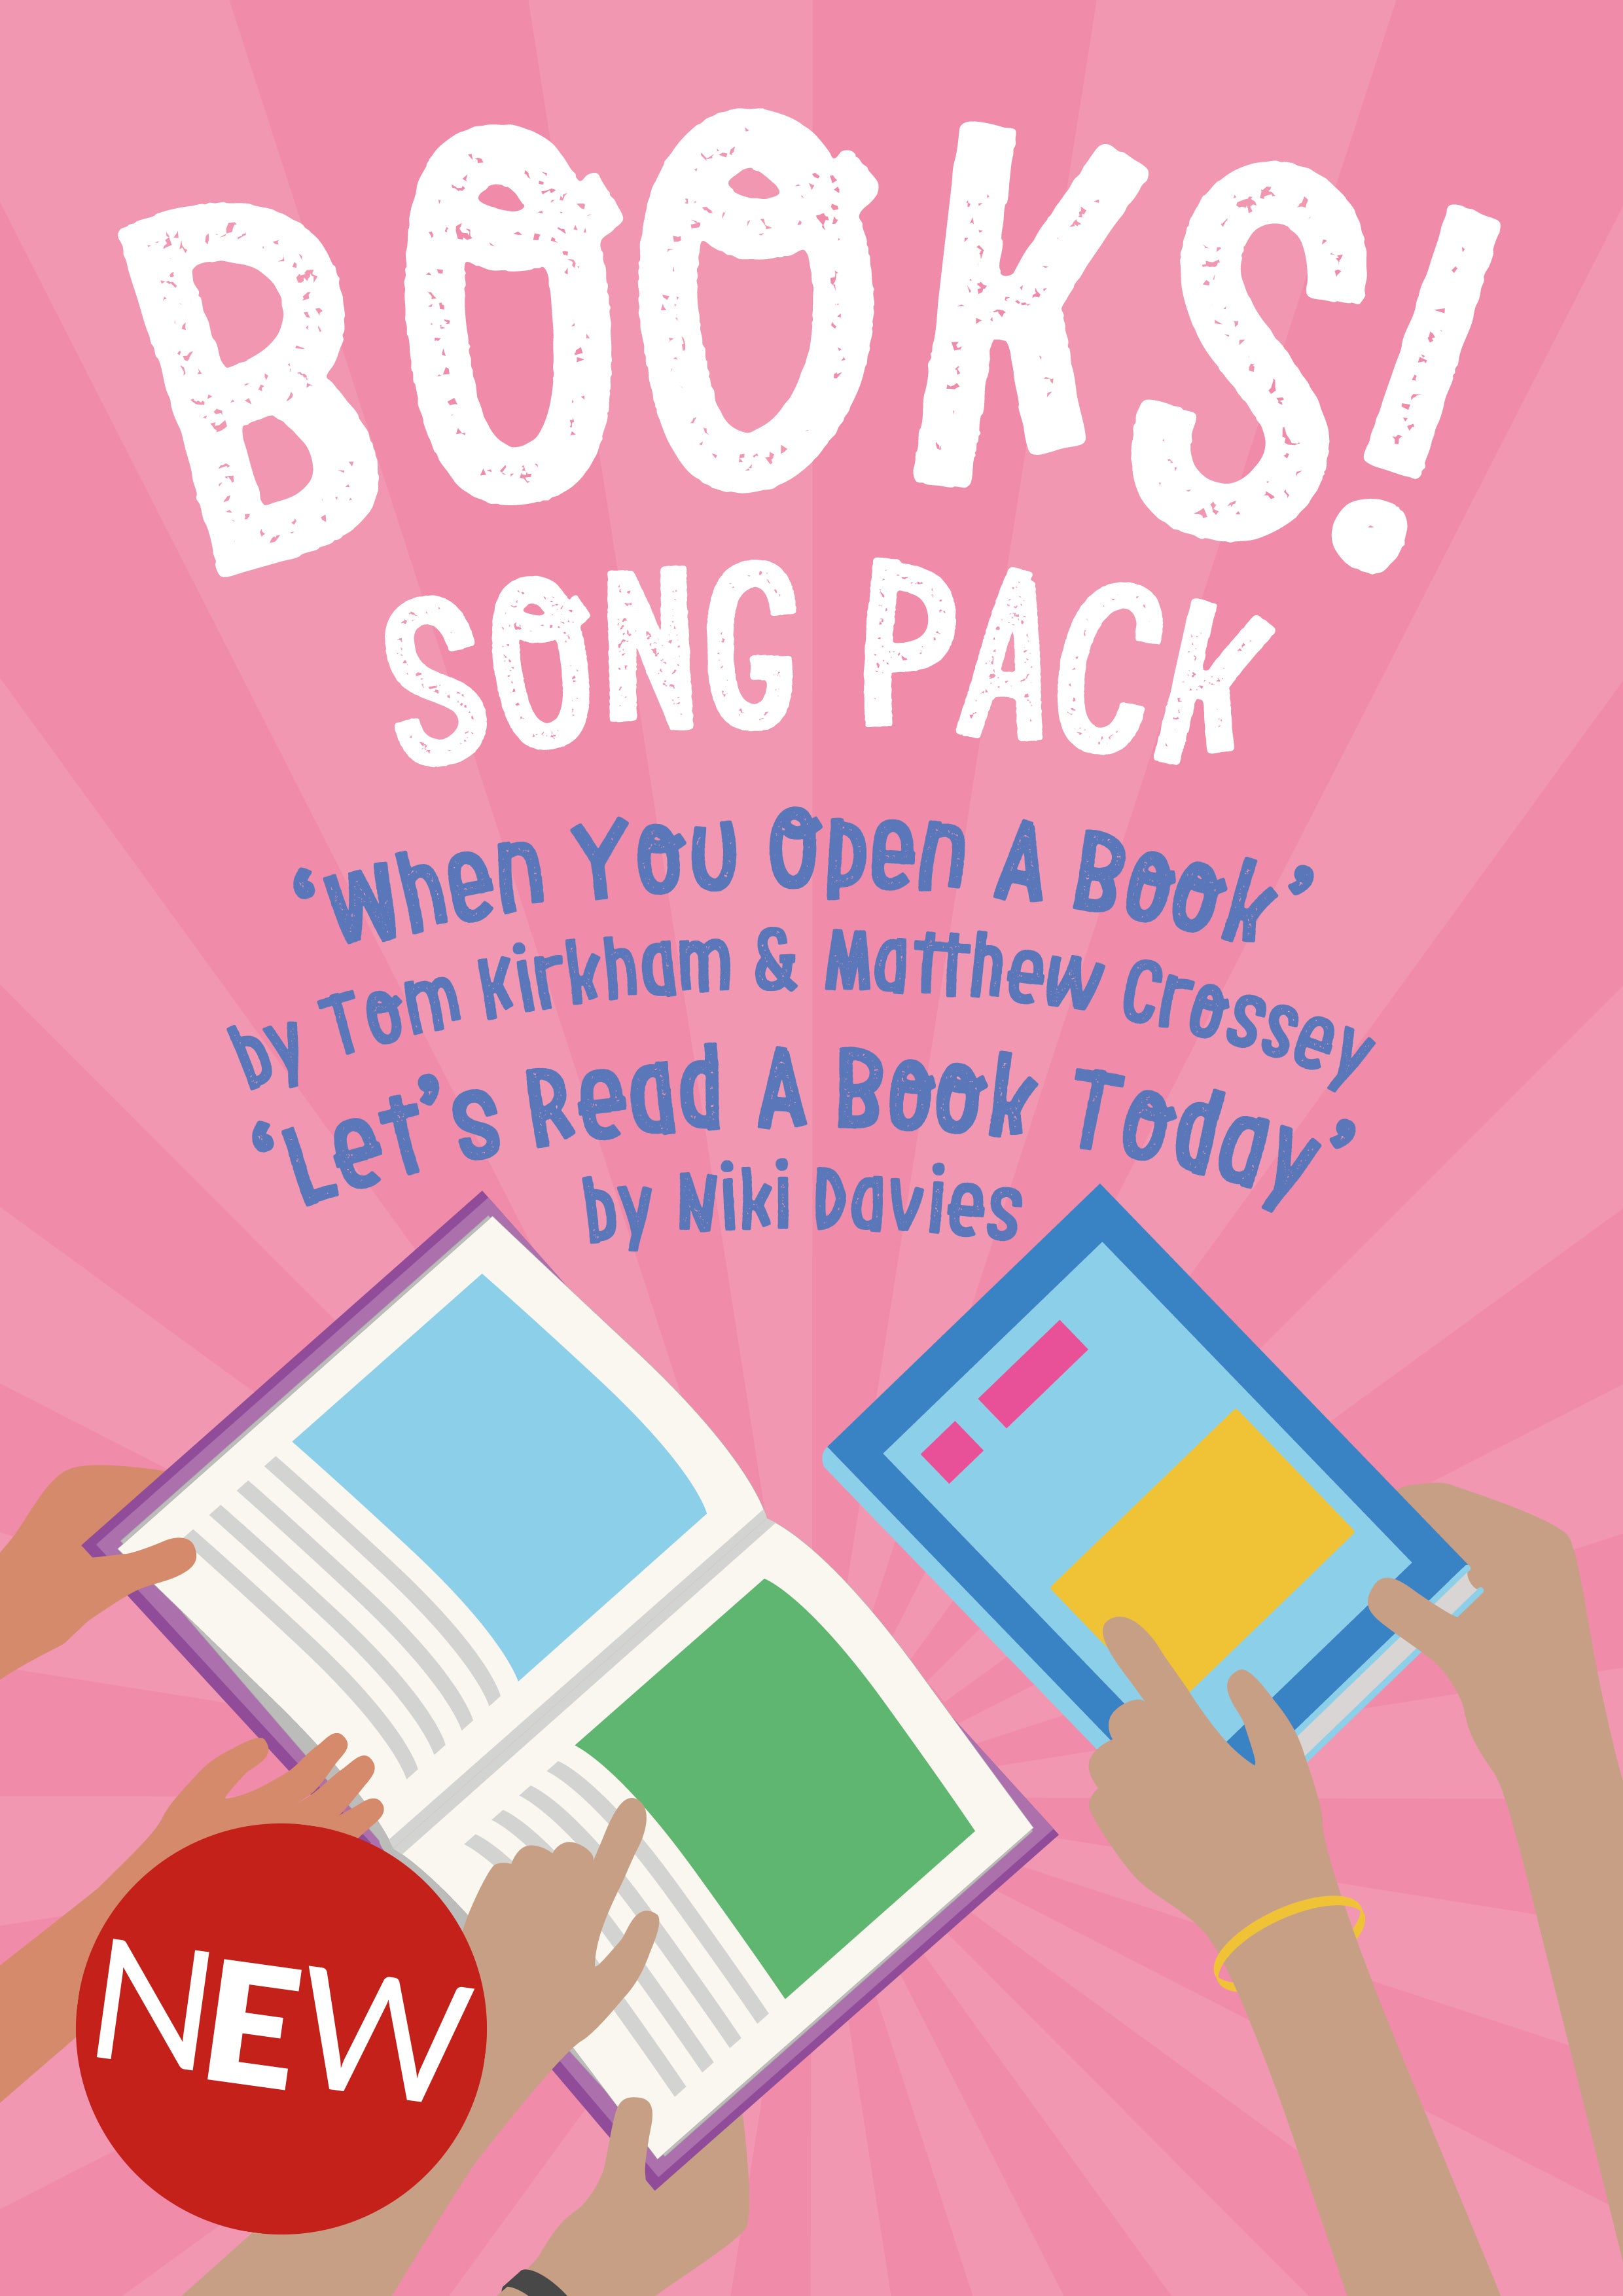 BOOKS! Songpack - 100% Discount With Code BOOKS100